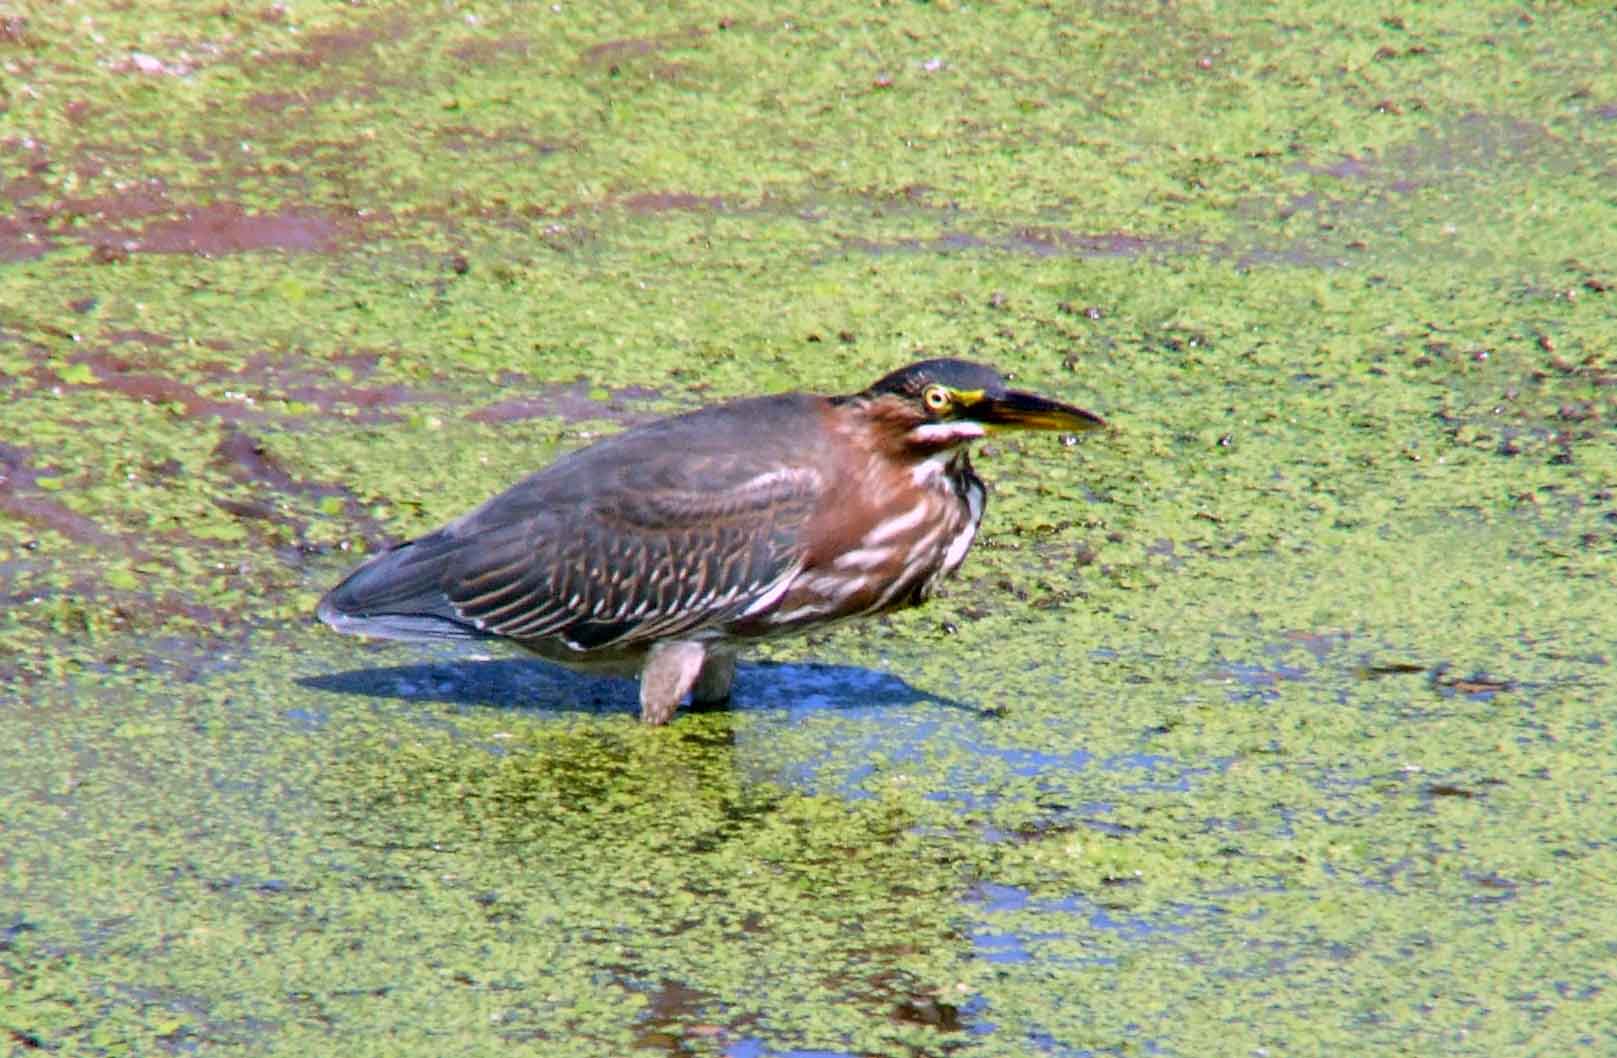 bird watching, C and O Canal, DC, Dick Maley, display, Fuji Digital Camera S9600, Hughes Hollow, Hunting Quarter Road, Marsh, Maryland, MD, Montgomery County, North America, photography, Poolesville, Potomac, Richard Maley, river, USA, Washington, Wetlands, Google Images, Green Heron, Kingdom: Animalia, Phylum: Chordata, Class: Aves, Subclass: Neornithes, Infraclass: Neognathae, Superorder: Neoaves, Order: Ciconiiformes, Family: Ardeidae, Genus: Butorides, Species: B virescens, Butorides virescens